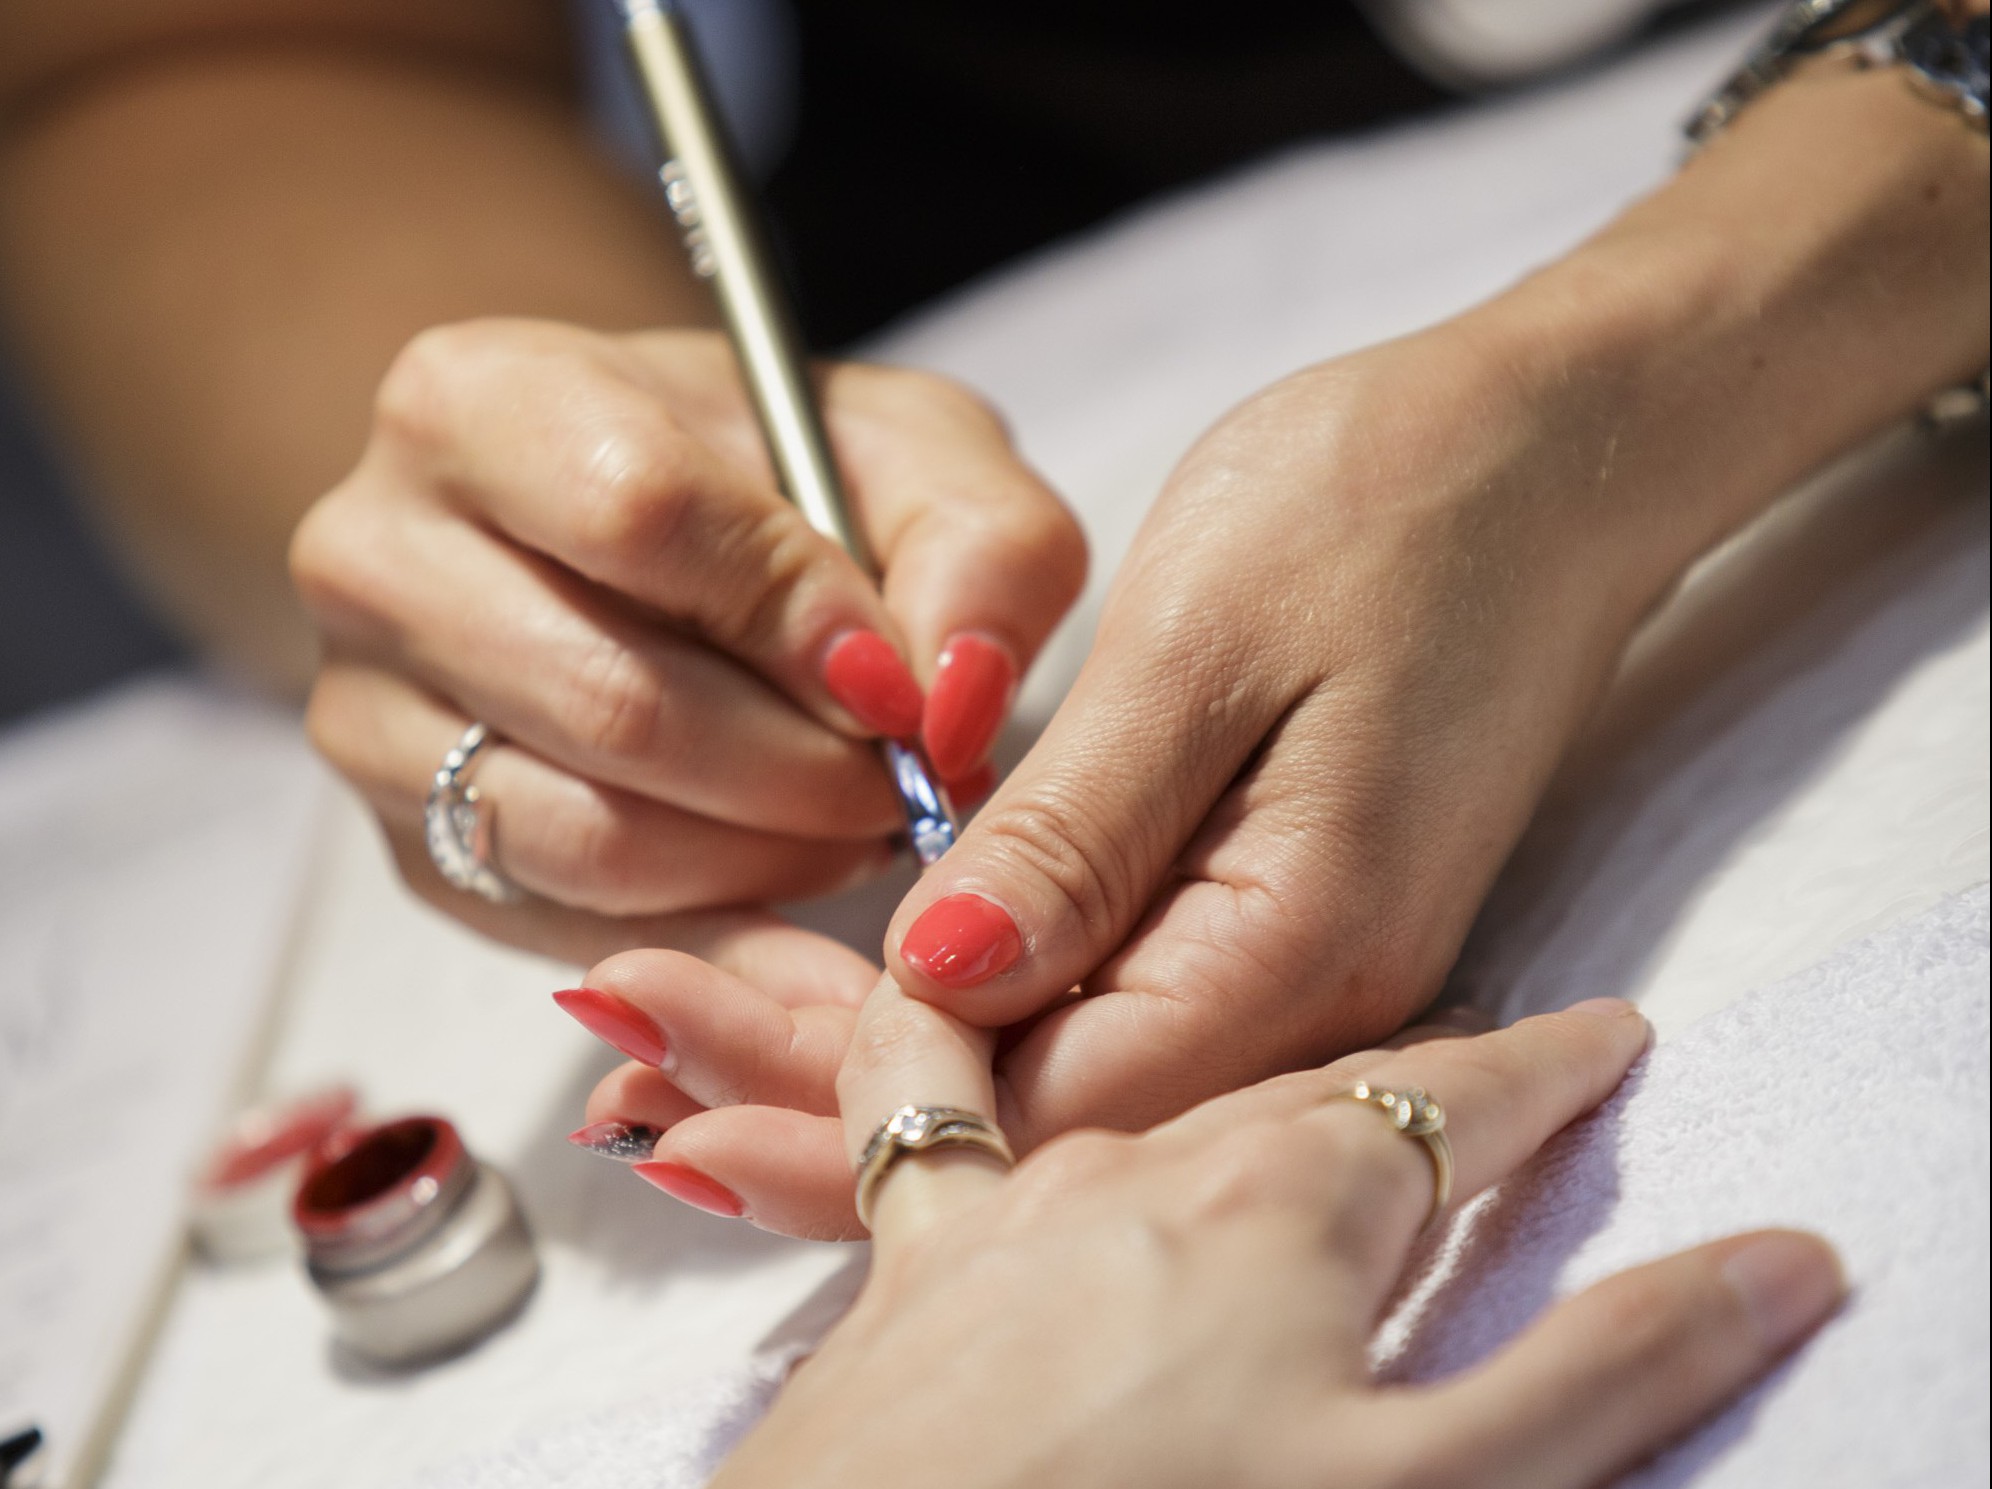 NEW! Makeup & nail competitions at Salon Melbourne.